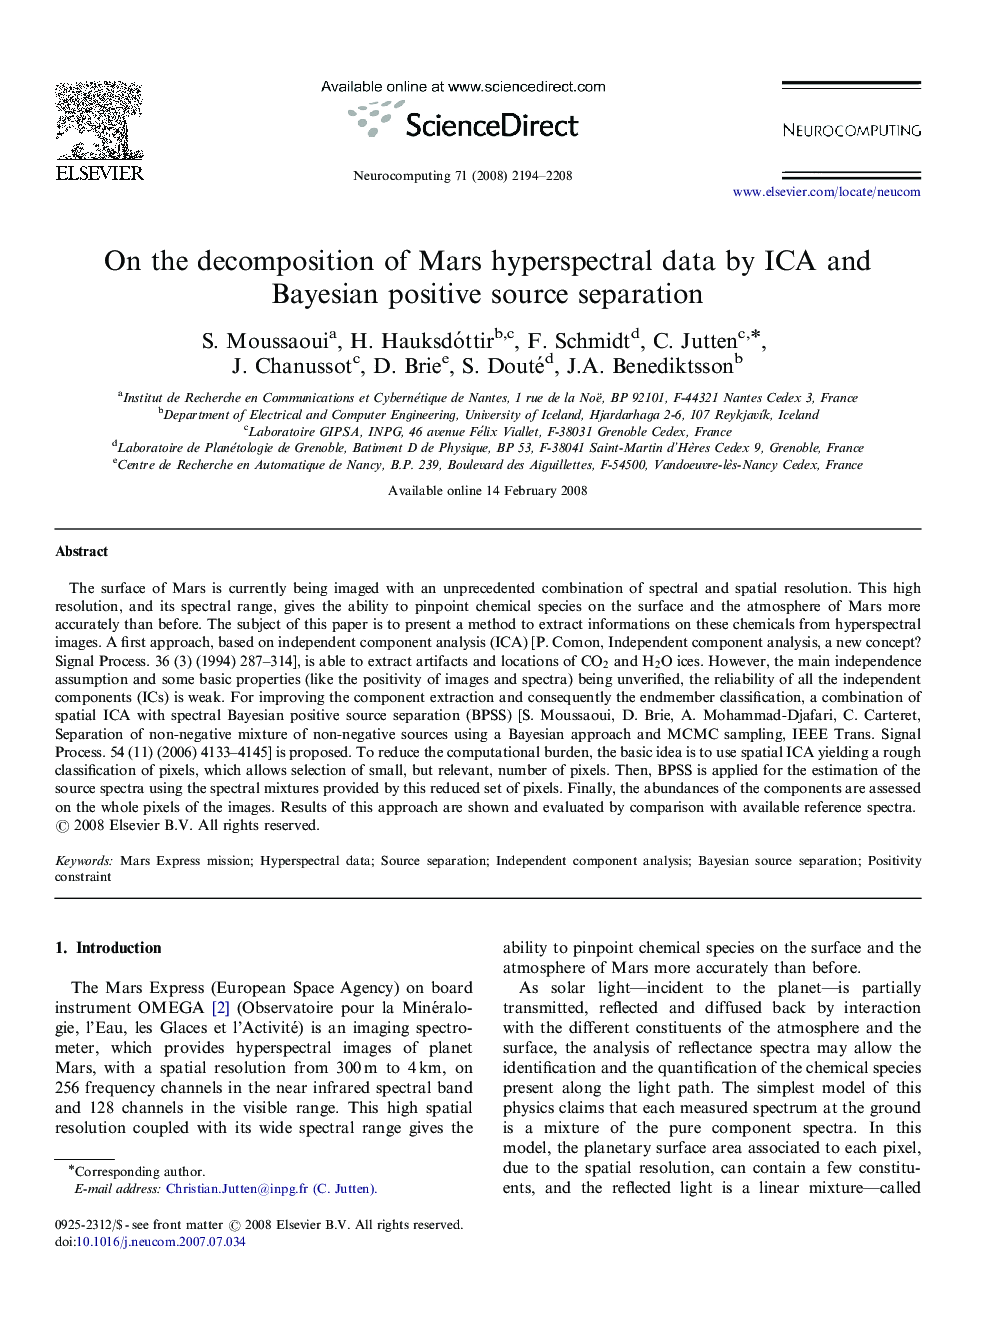 On the decomposition of Mars hyperspectral data by ICA and Bayesian positive source separation